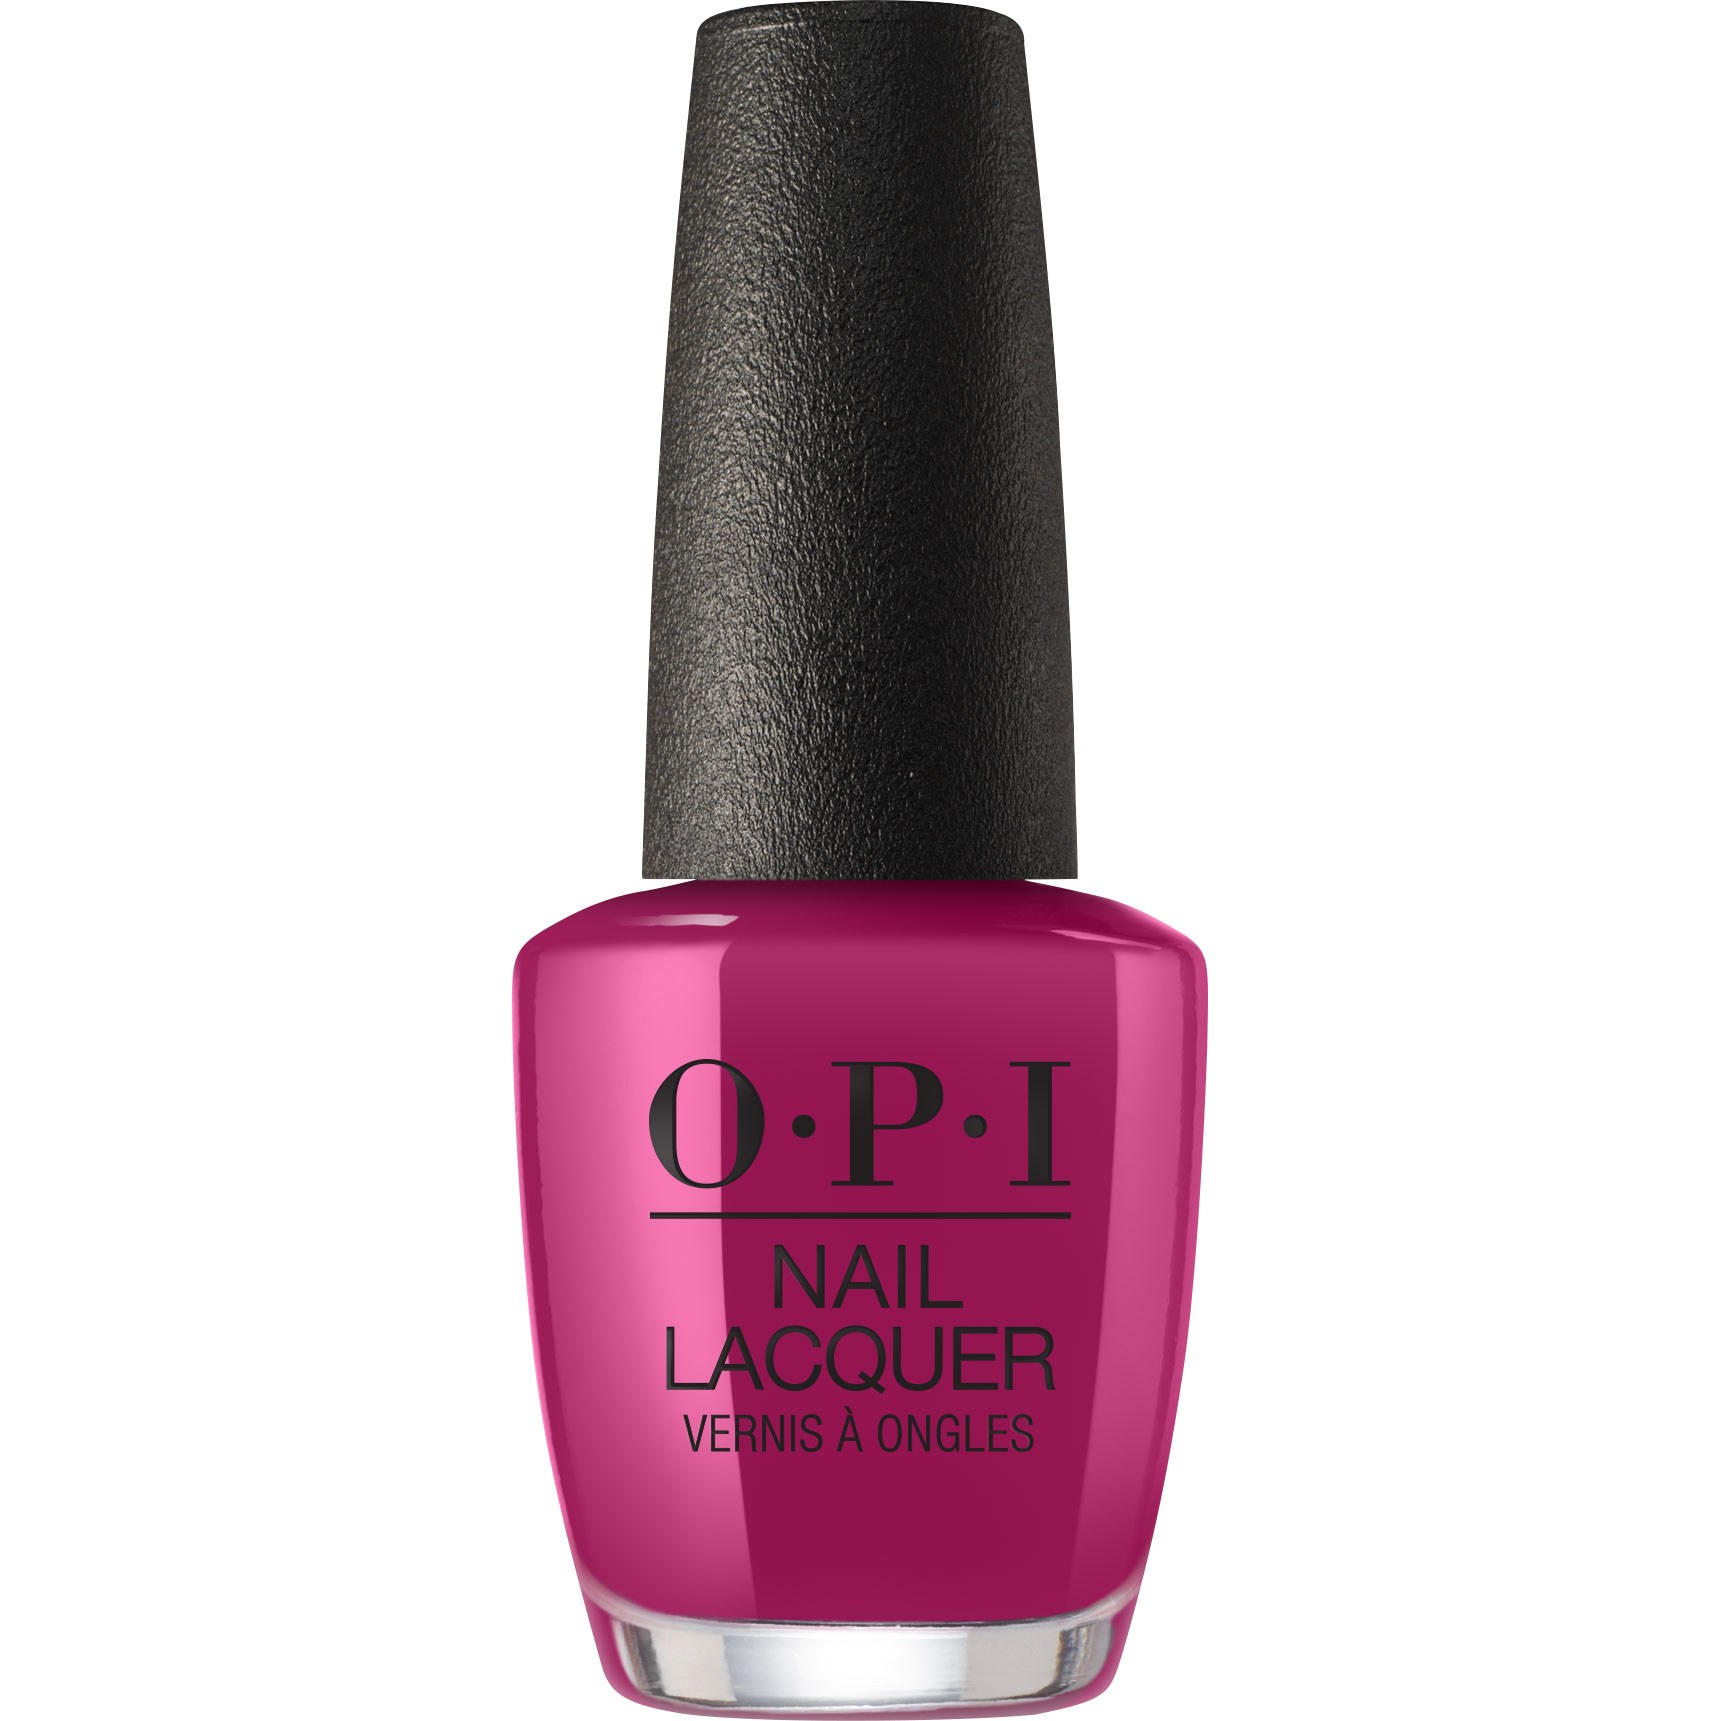 OPI New Orleans: Spare Me a French Quarter?